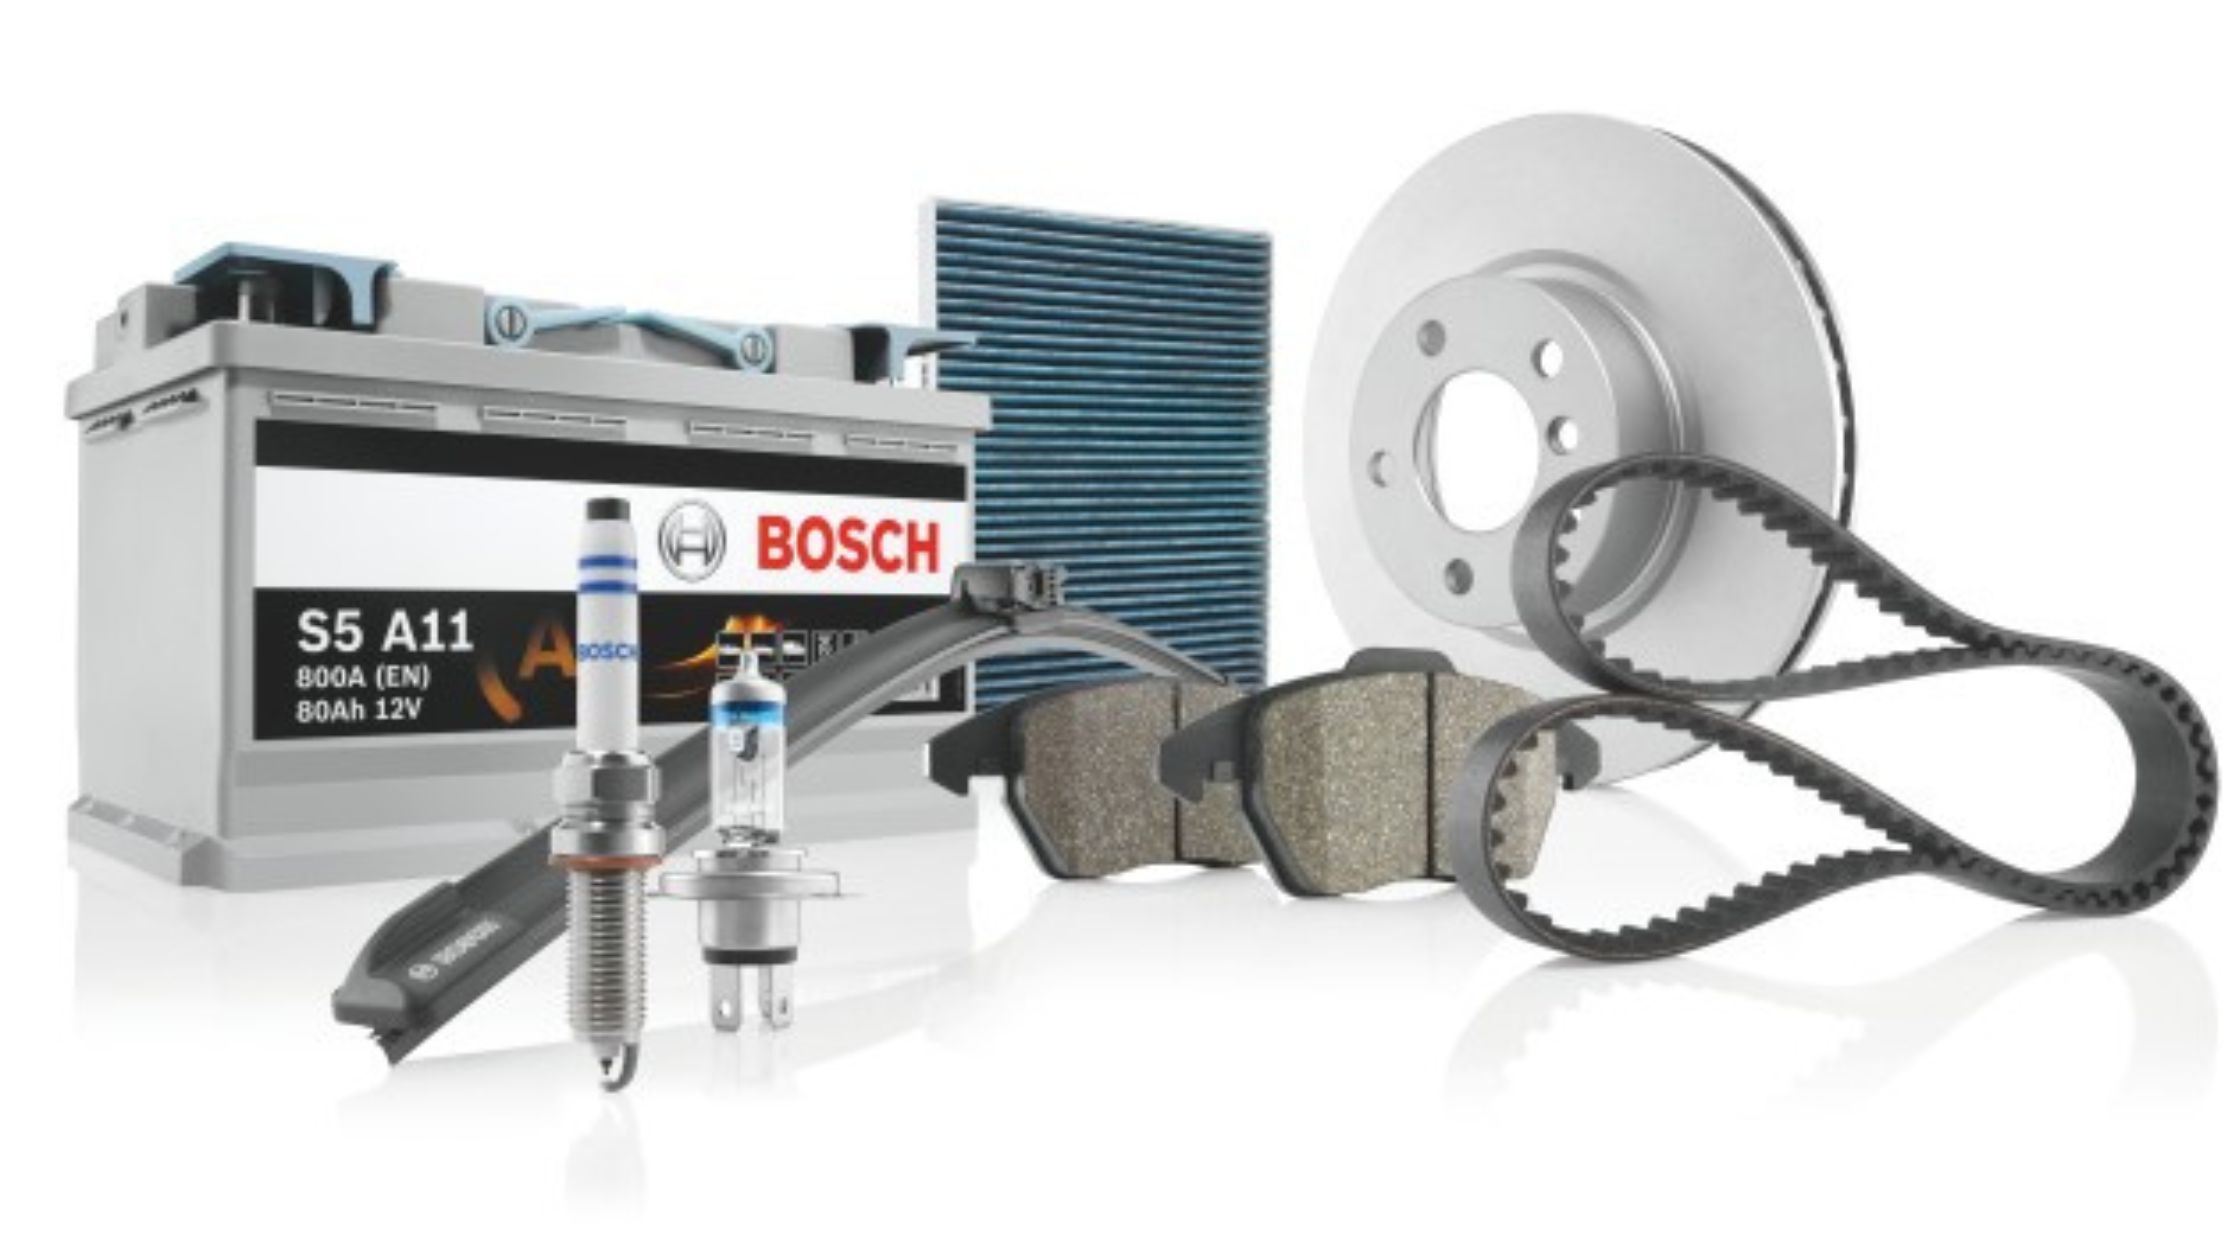 Bosch Automotive Parts: The Trusted Choice for Reliable Performance